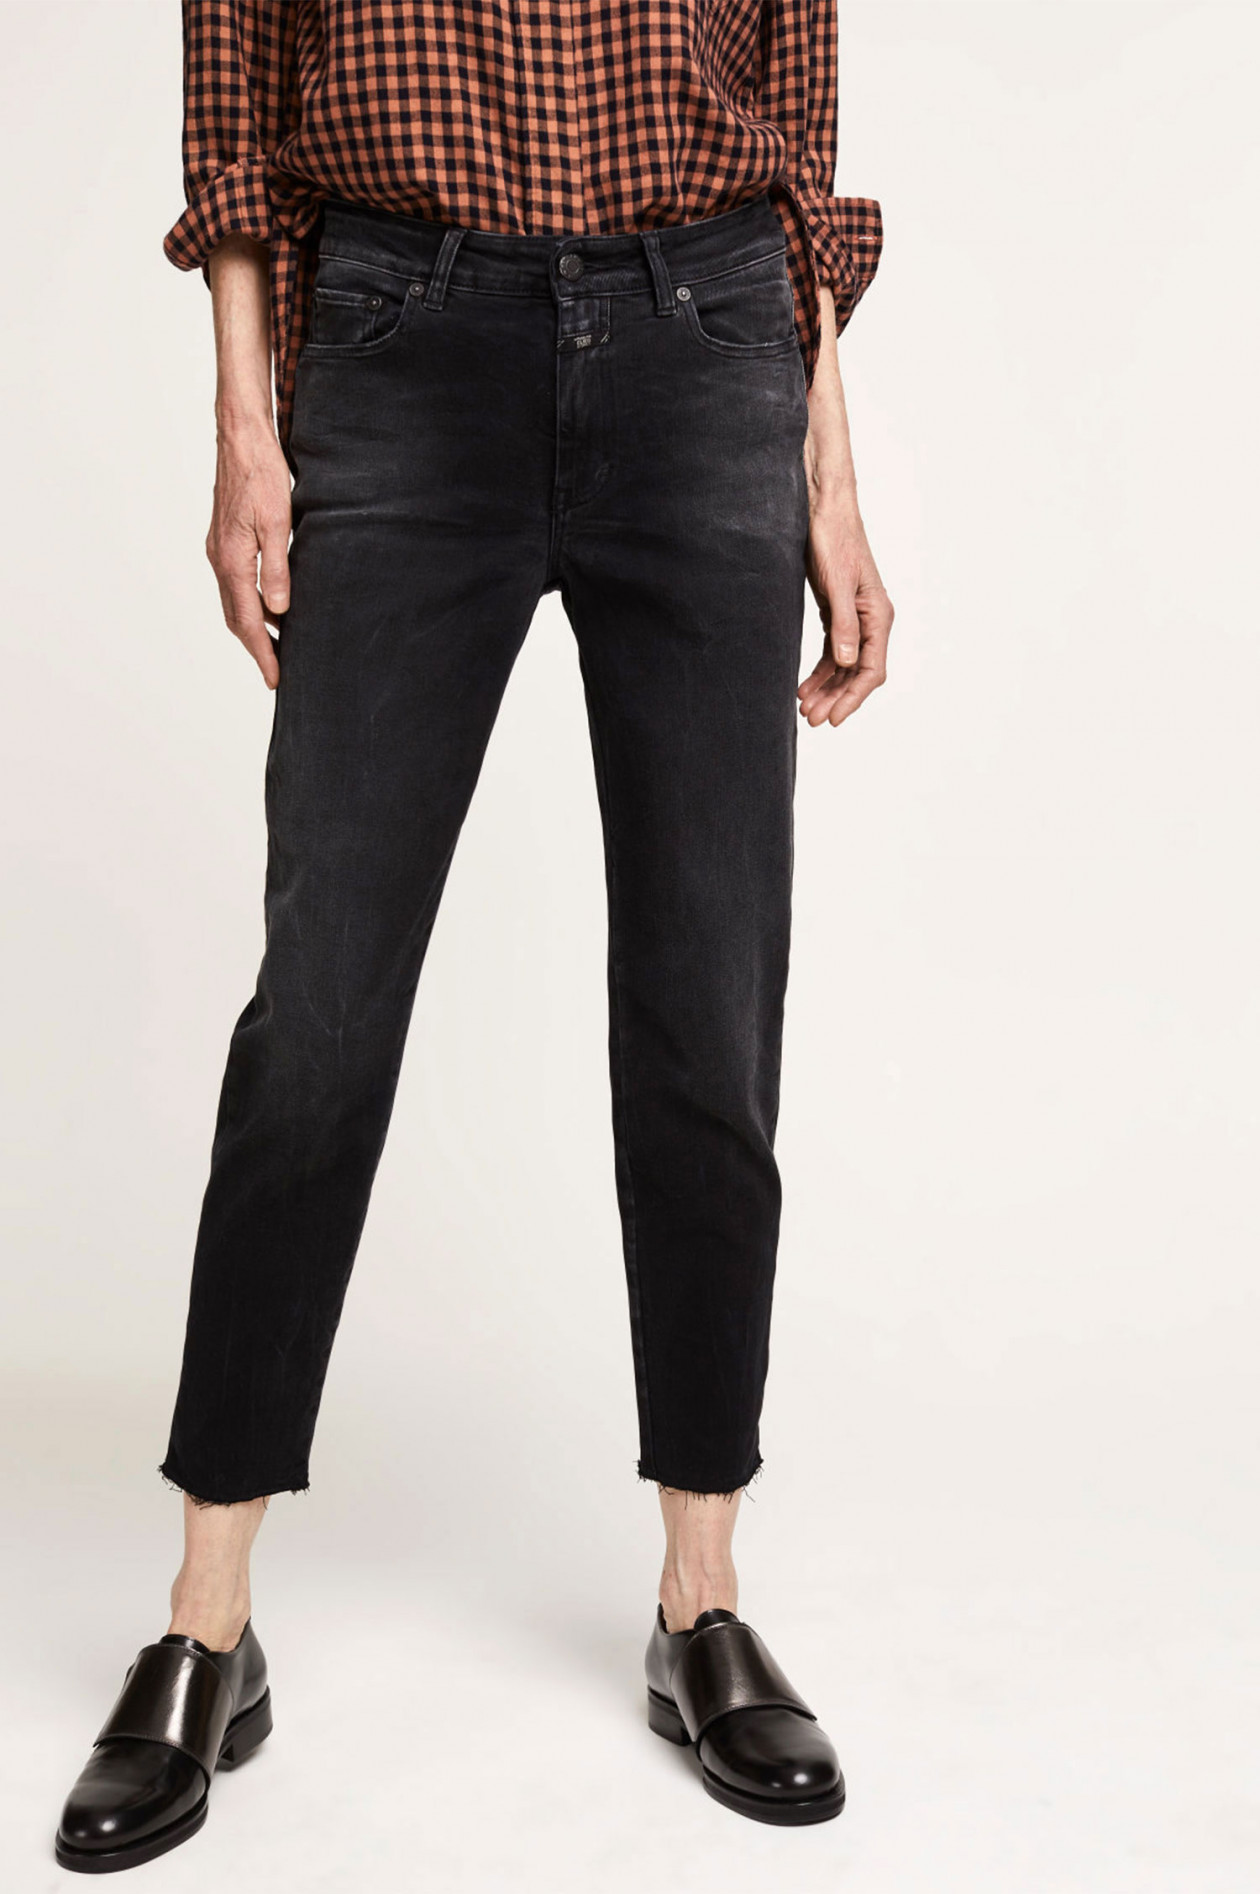 Closed Jeans FIT in | GRUENER.AT